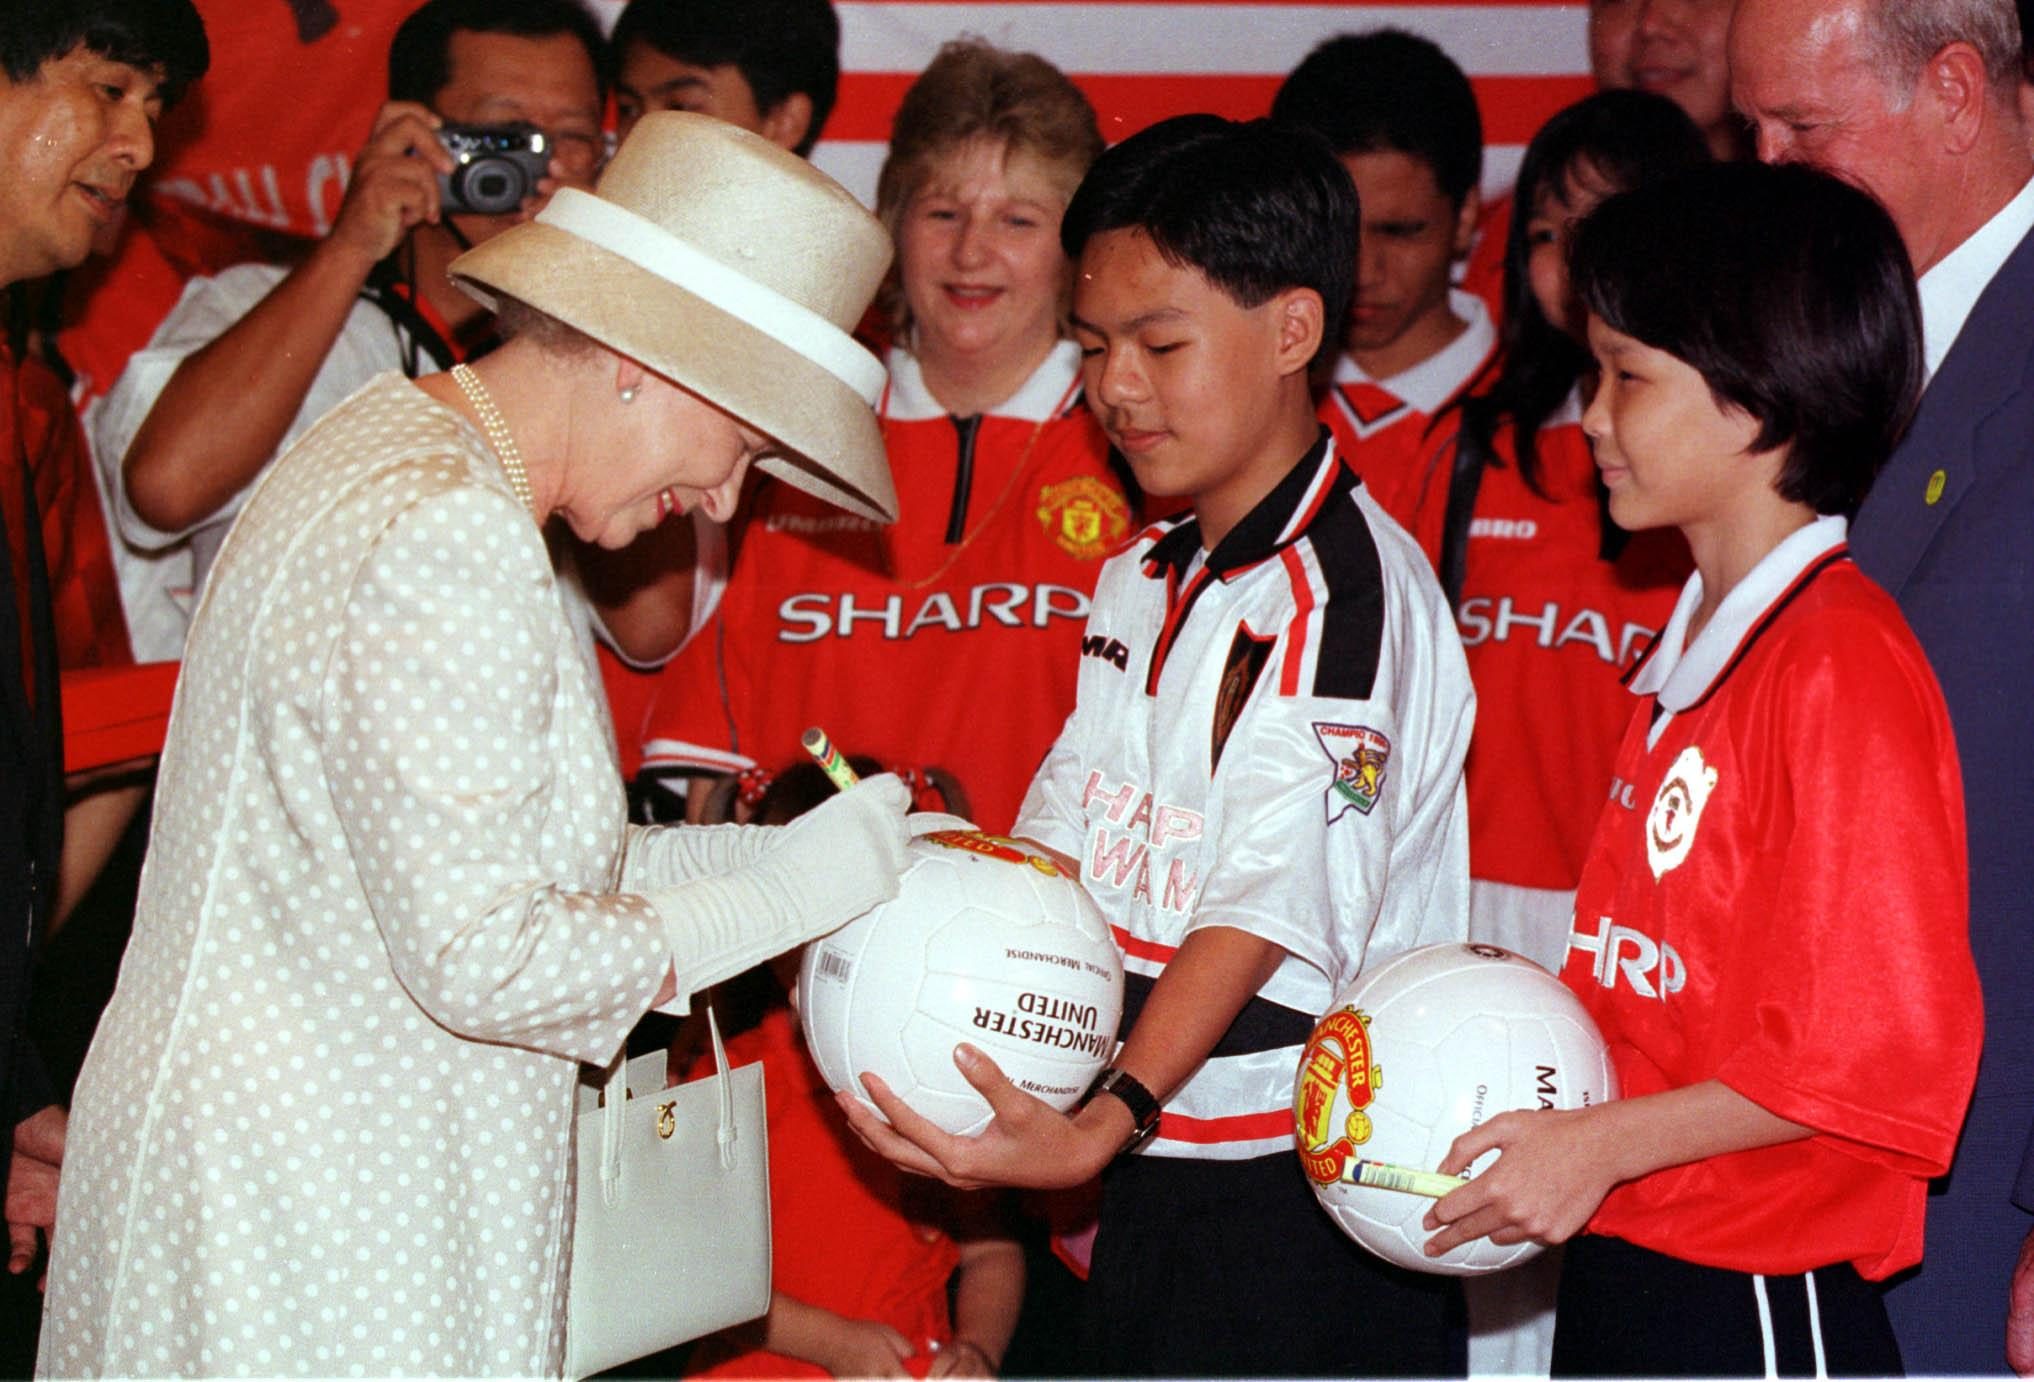 Queen Elizabeth Signs A Manchester United Football For The Mayalsian Branch Of The Manchester United Supporters Club In Kuala Lumpur Malaysia. 1998 . Rexmailpix.